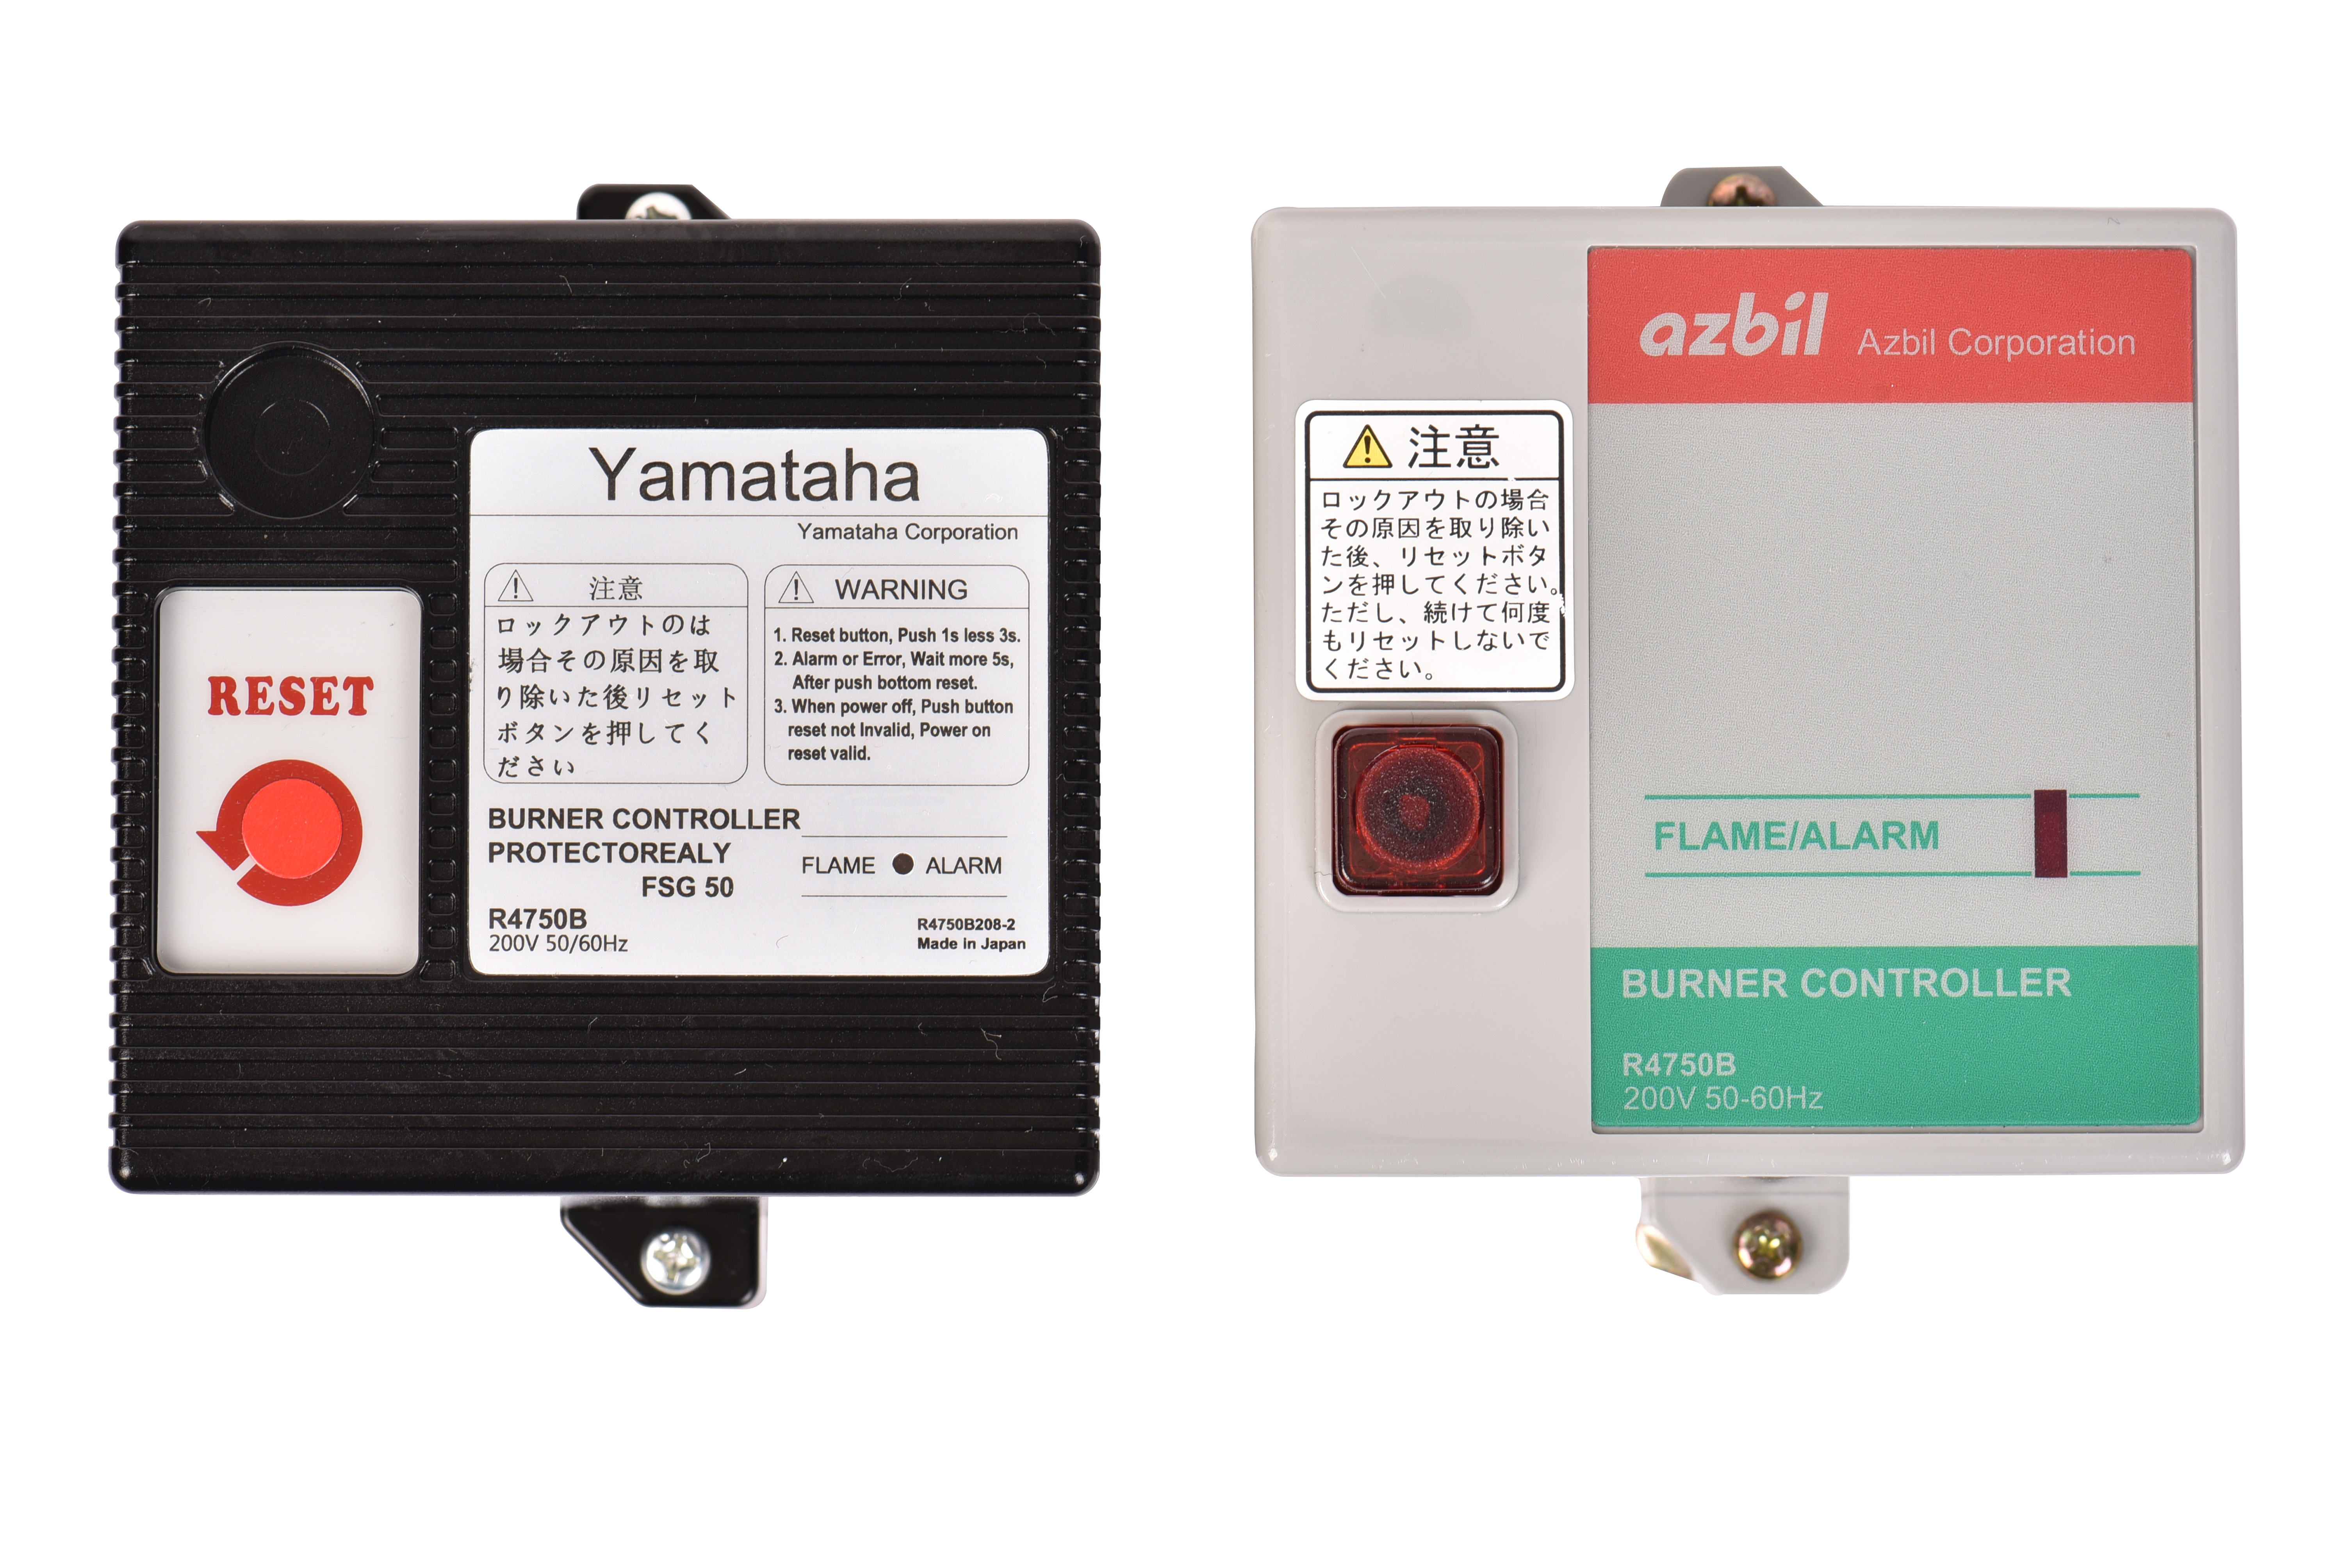 azbil R4750B(discontinued) is replaced with the Yamataha R4750B (1)